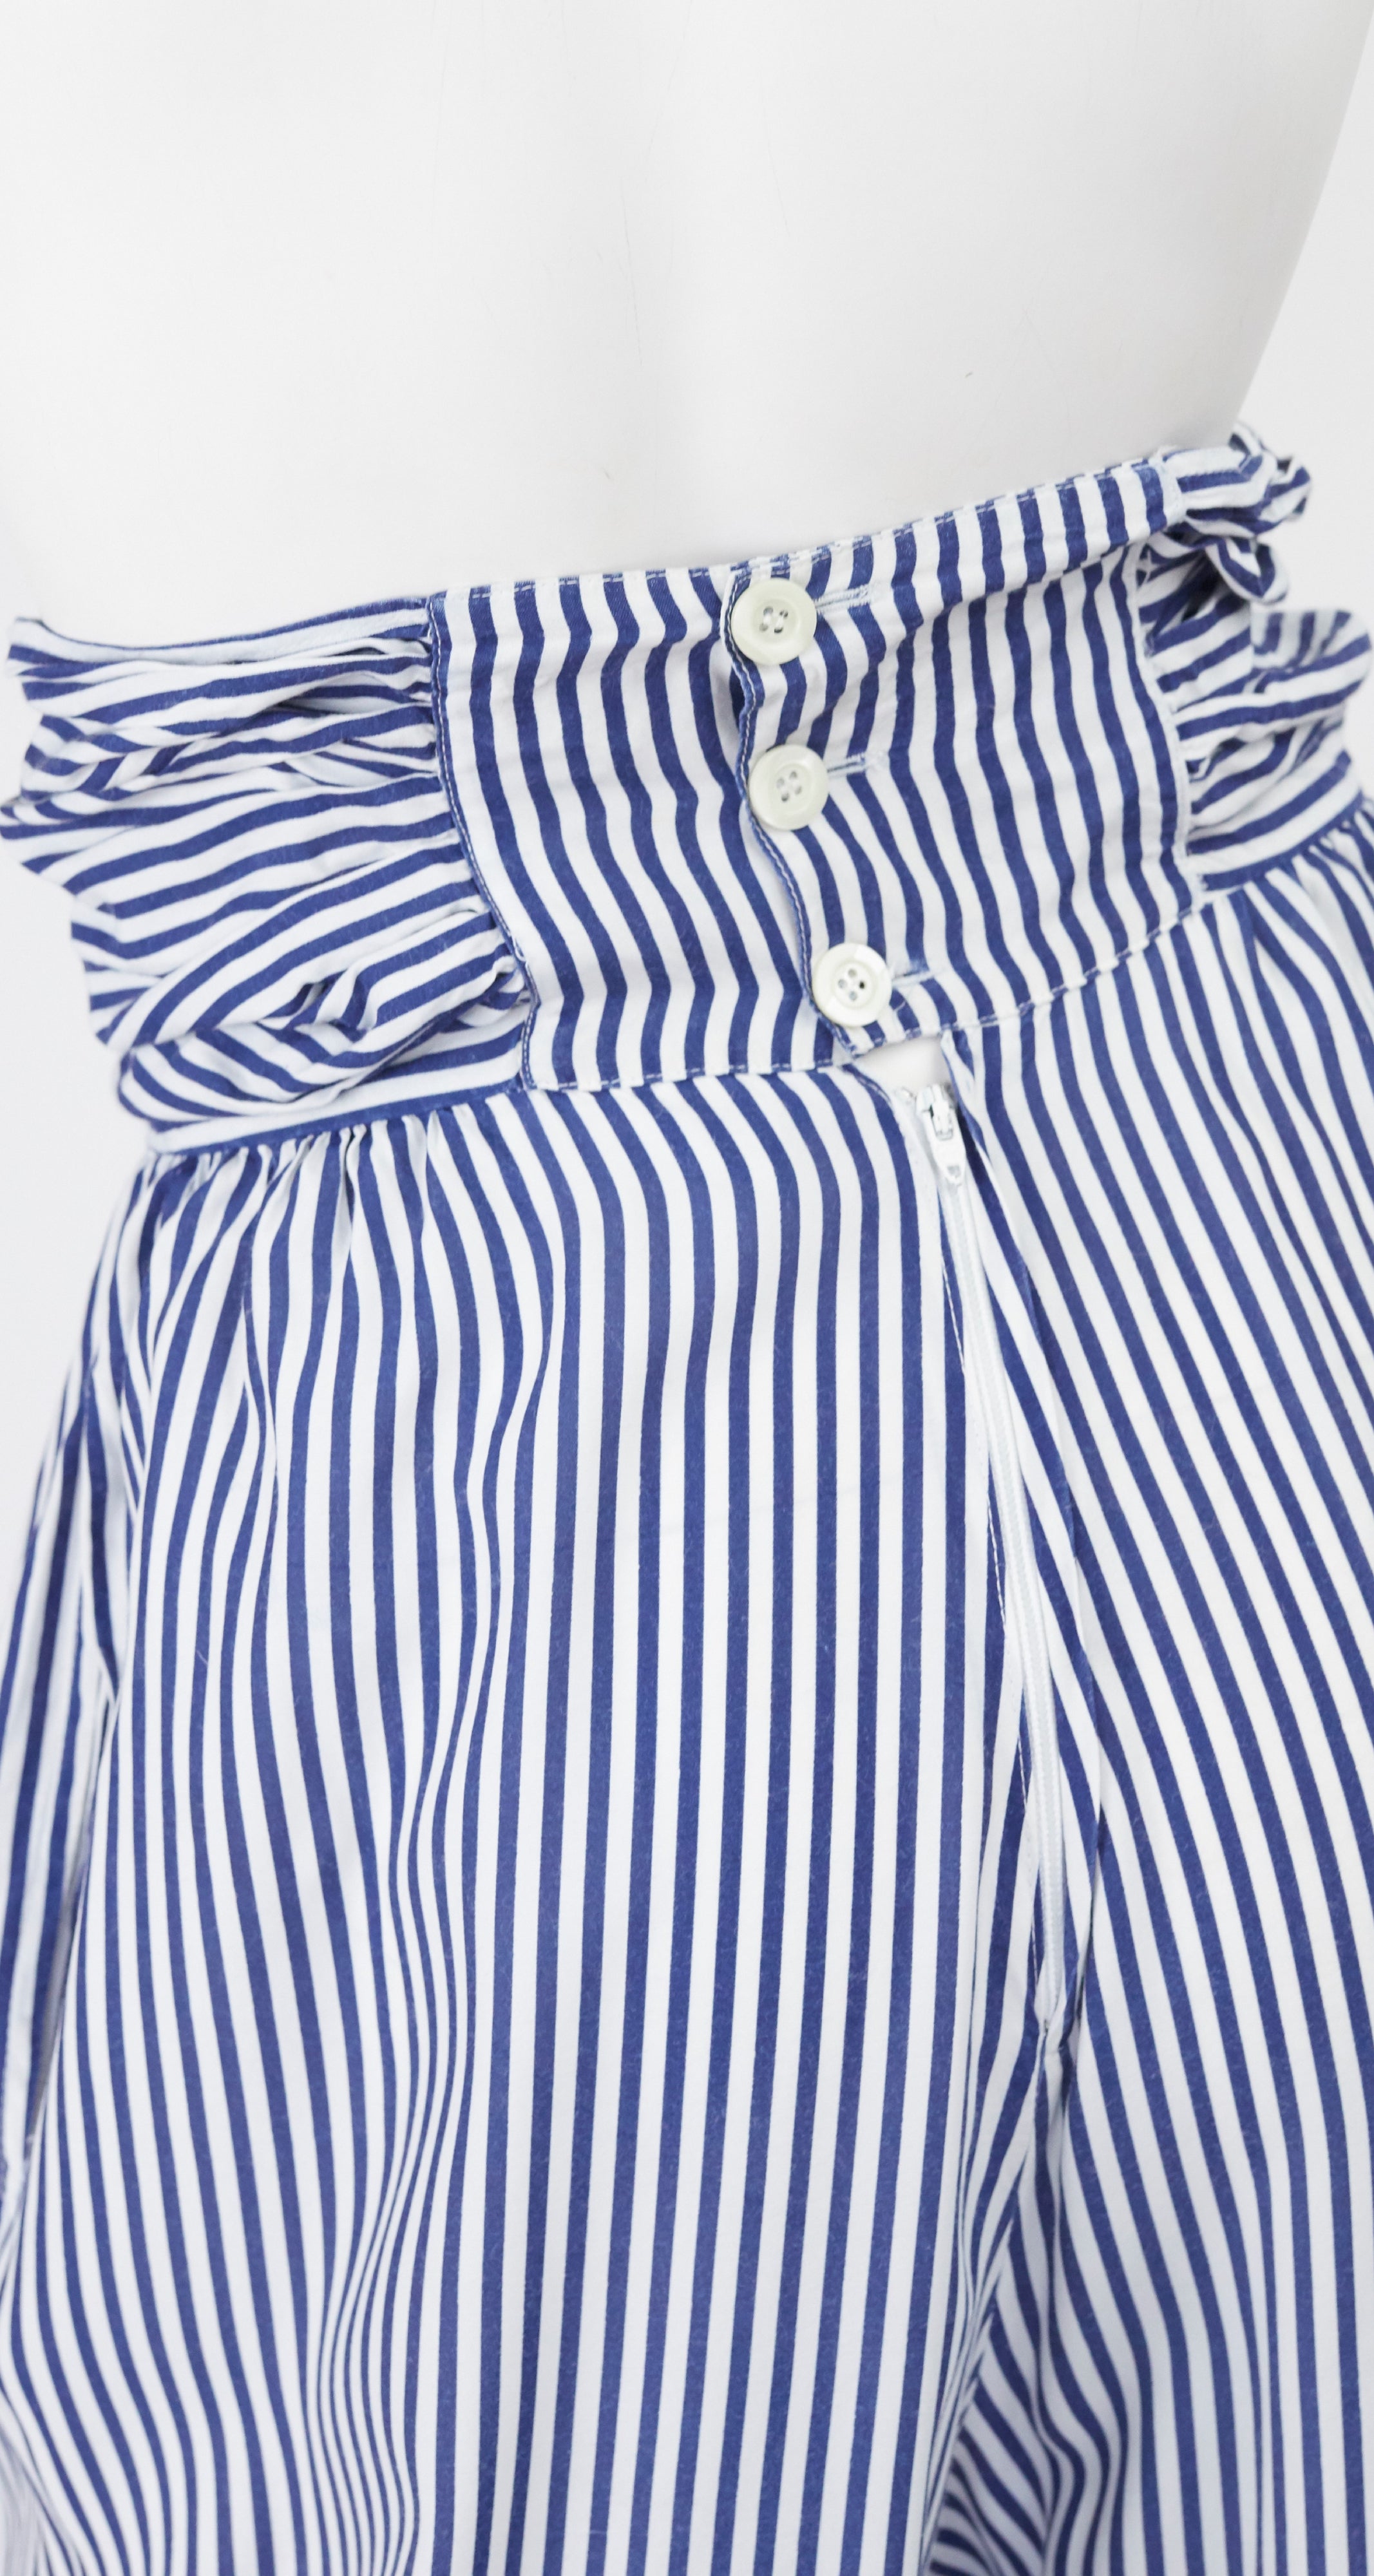 1970s White & Blue Striped Cotton High-Waisted Pants